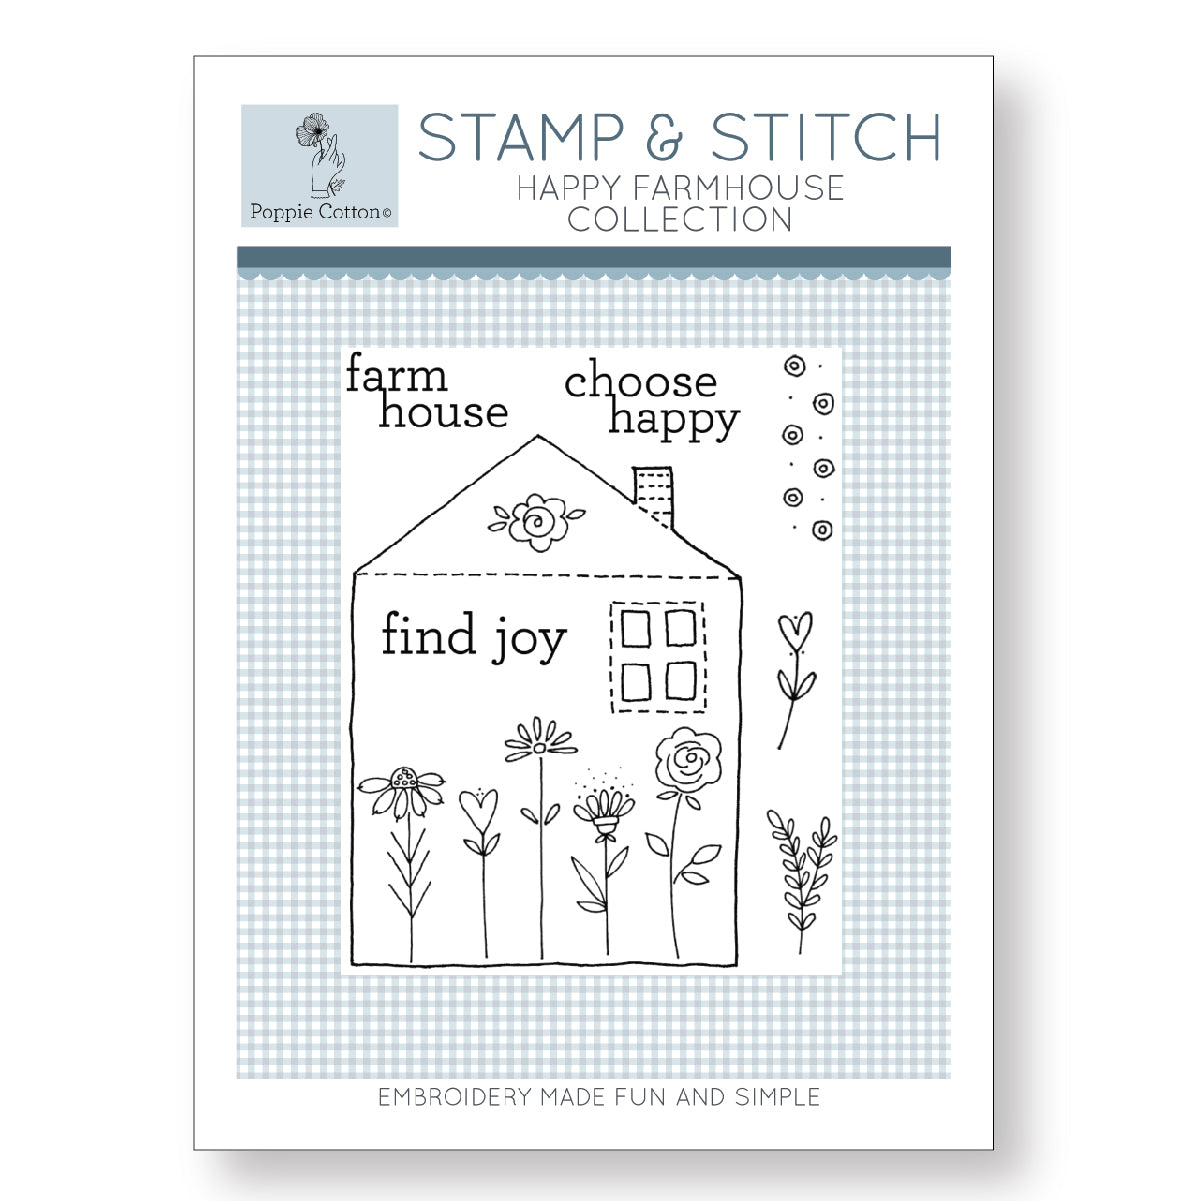 Stamp and Stitch Happy Farmhouse Collection by Poppie Cotton